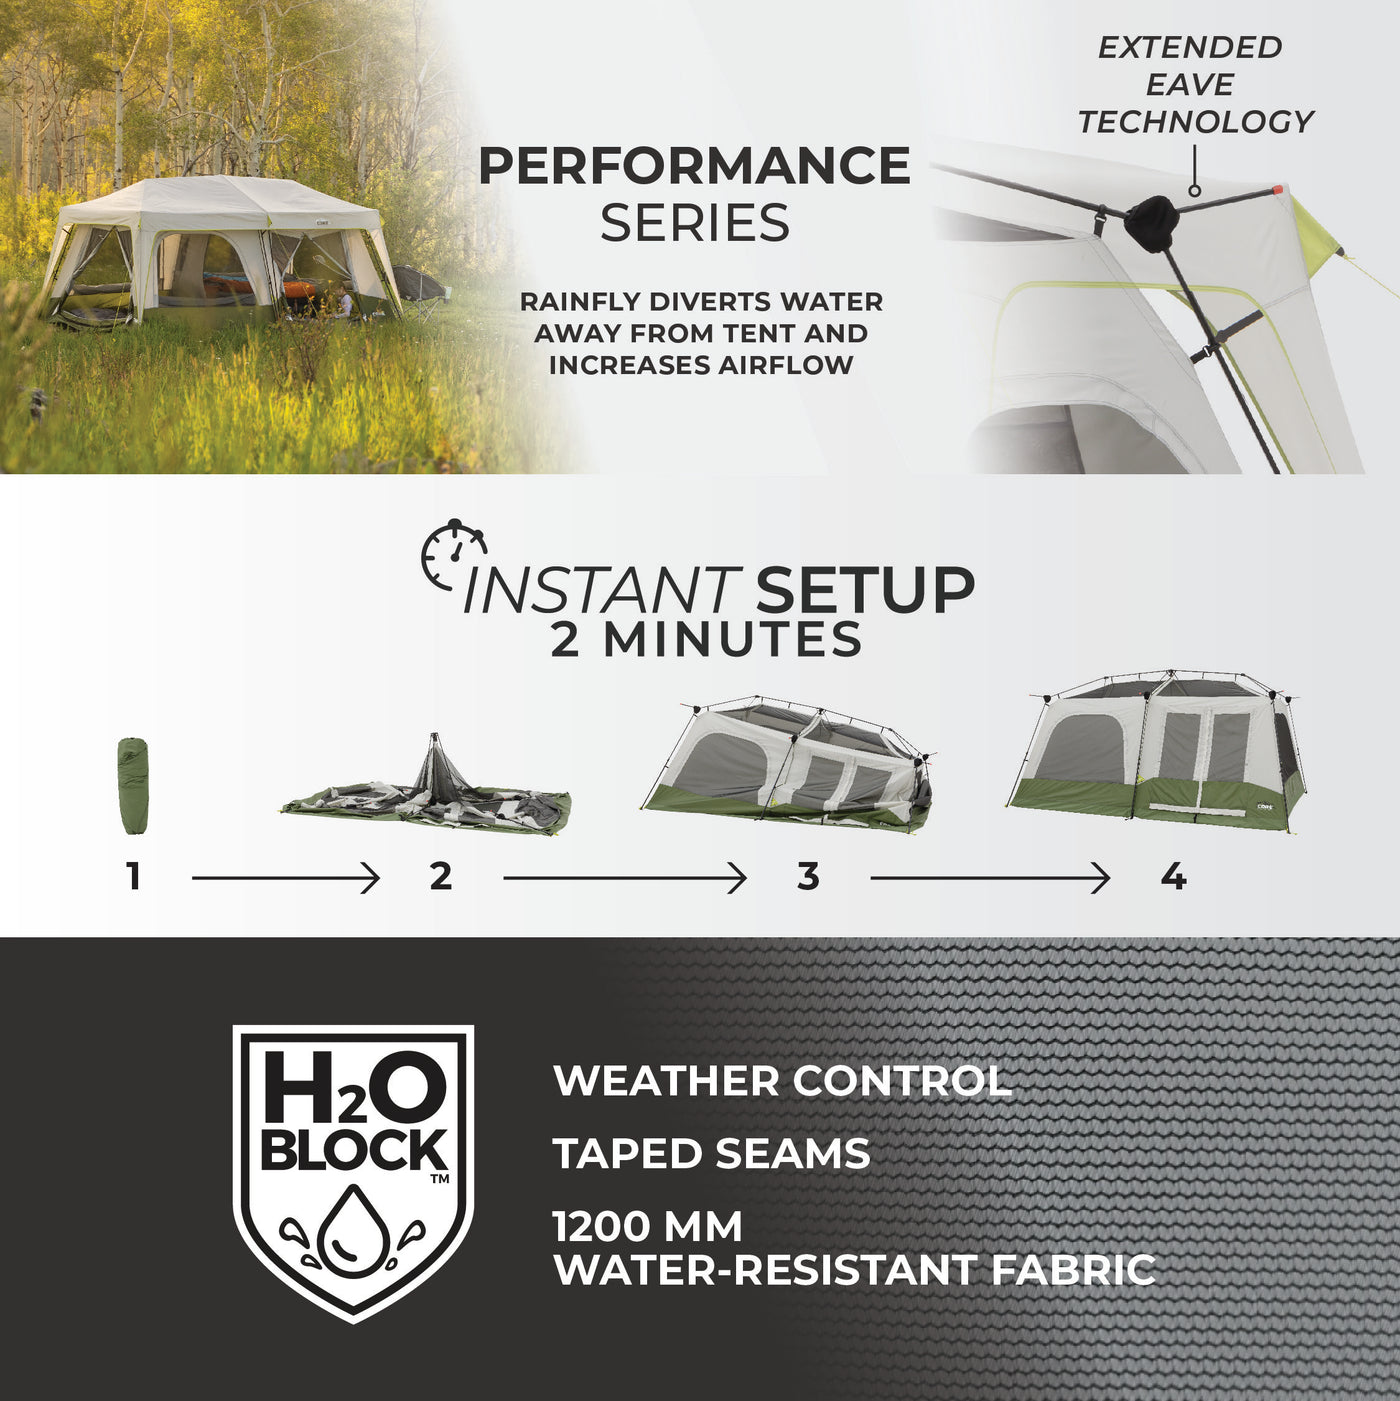 10 Person Instant Cabin Performance Tent 14' x 10' – Core Equipment